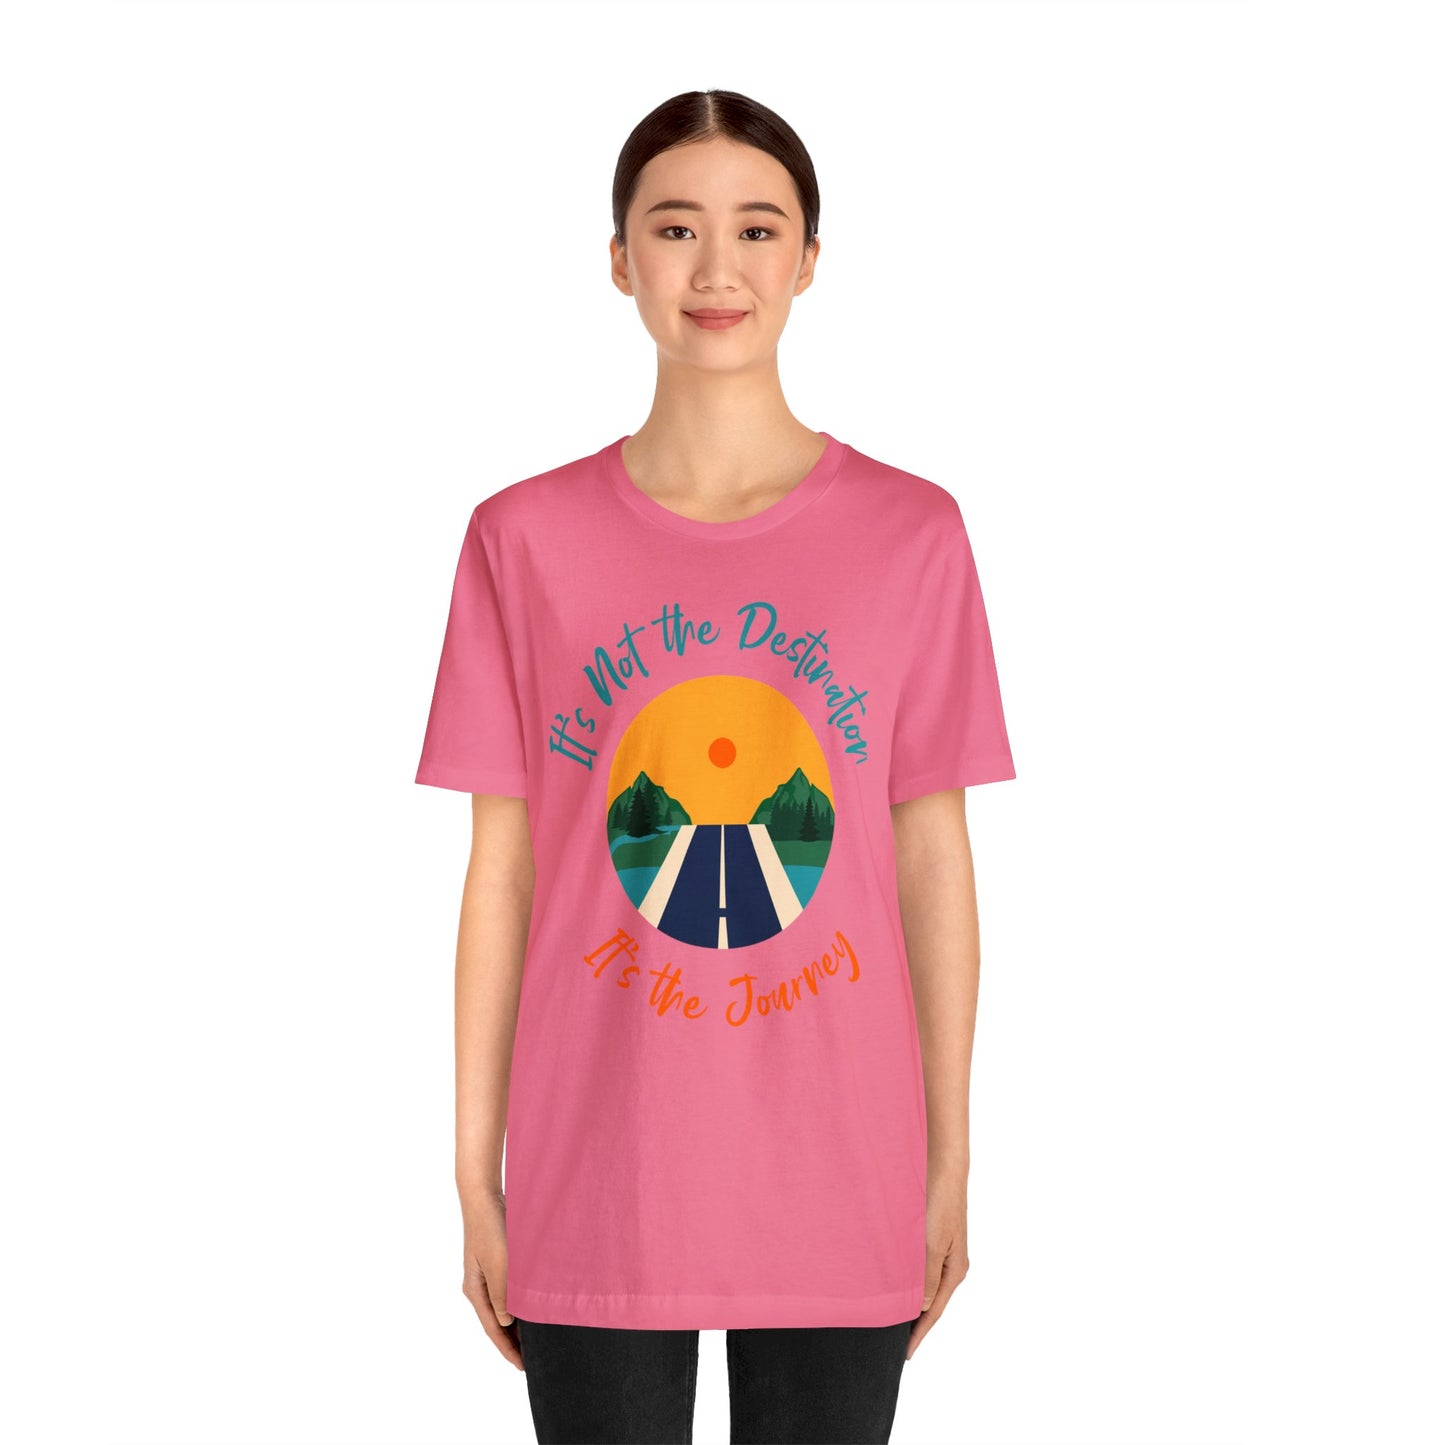 It's Not The Destination, It's The journey - Graphic T Shirt For Men and Women